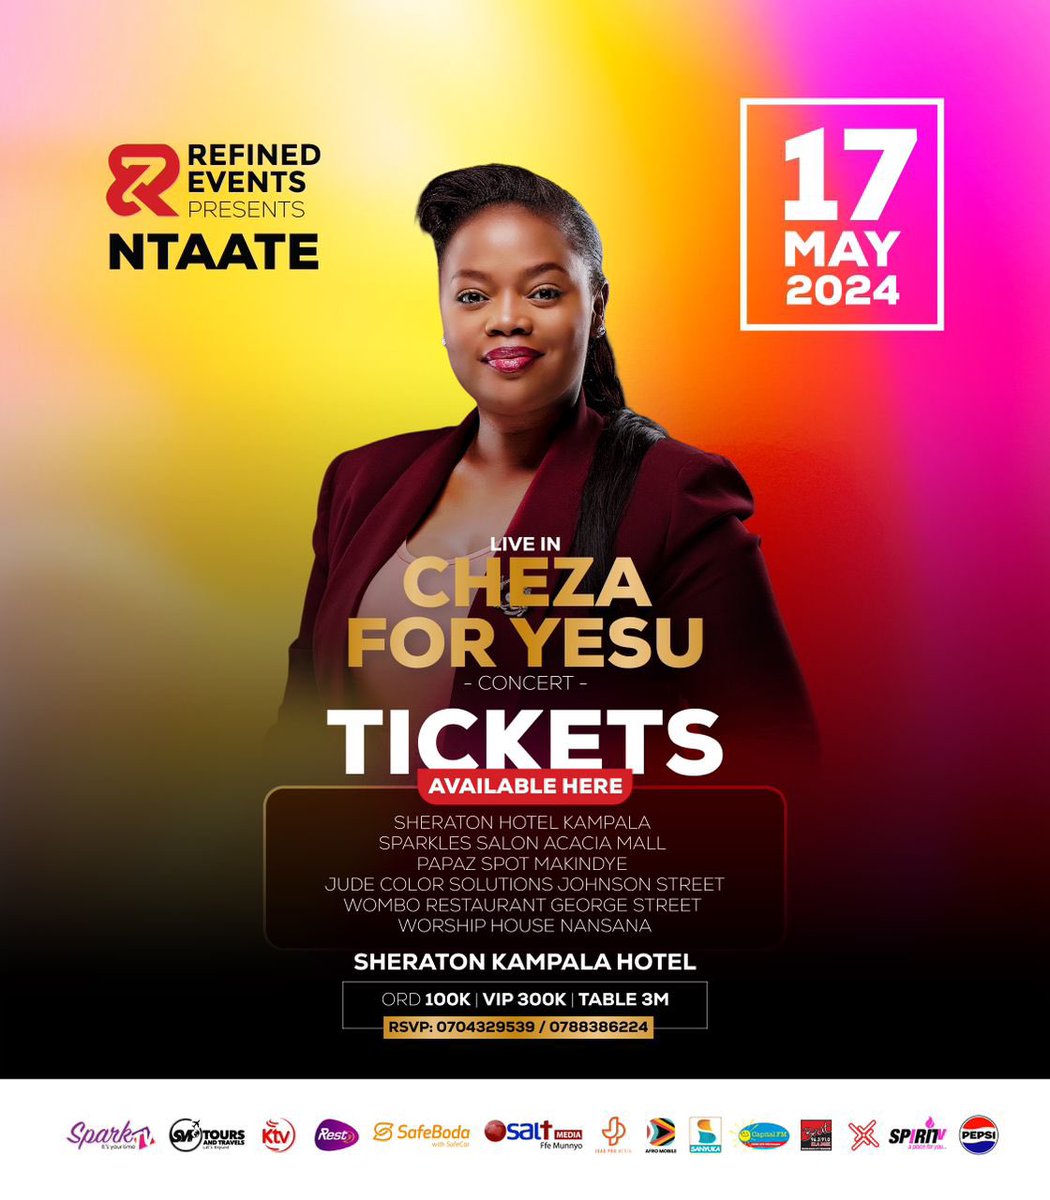 Incase your around town, pass by @KampalaSheraton, buy your ticket and secure a spot at the #ChezaForYesuConcert this 17th of May. Tell a friend Fee : 100k Ord , 300k vip and 3m a table